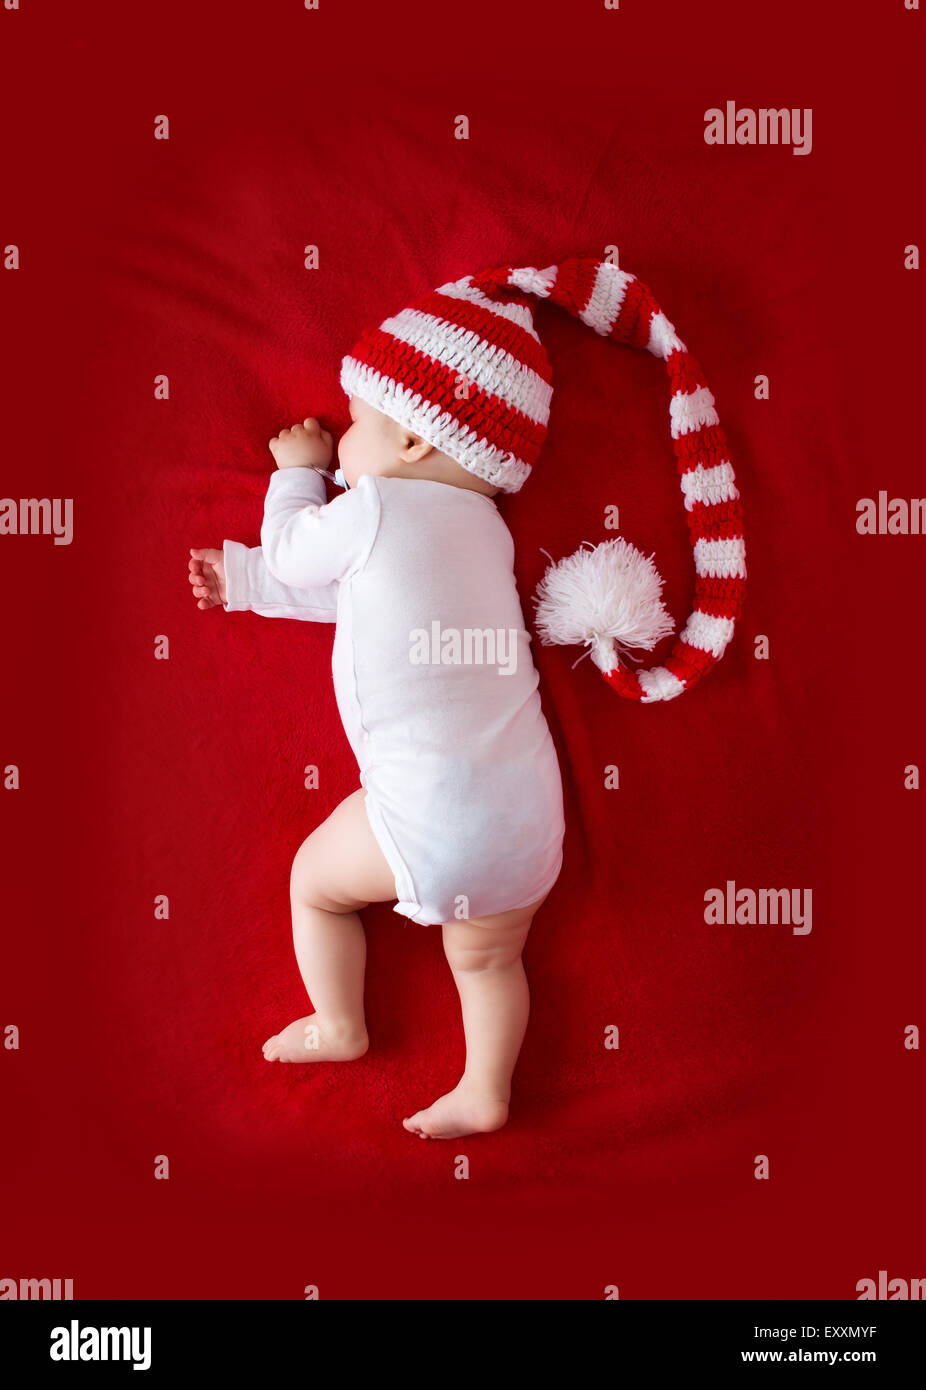 Baby in red white knitted hat Stock Photo